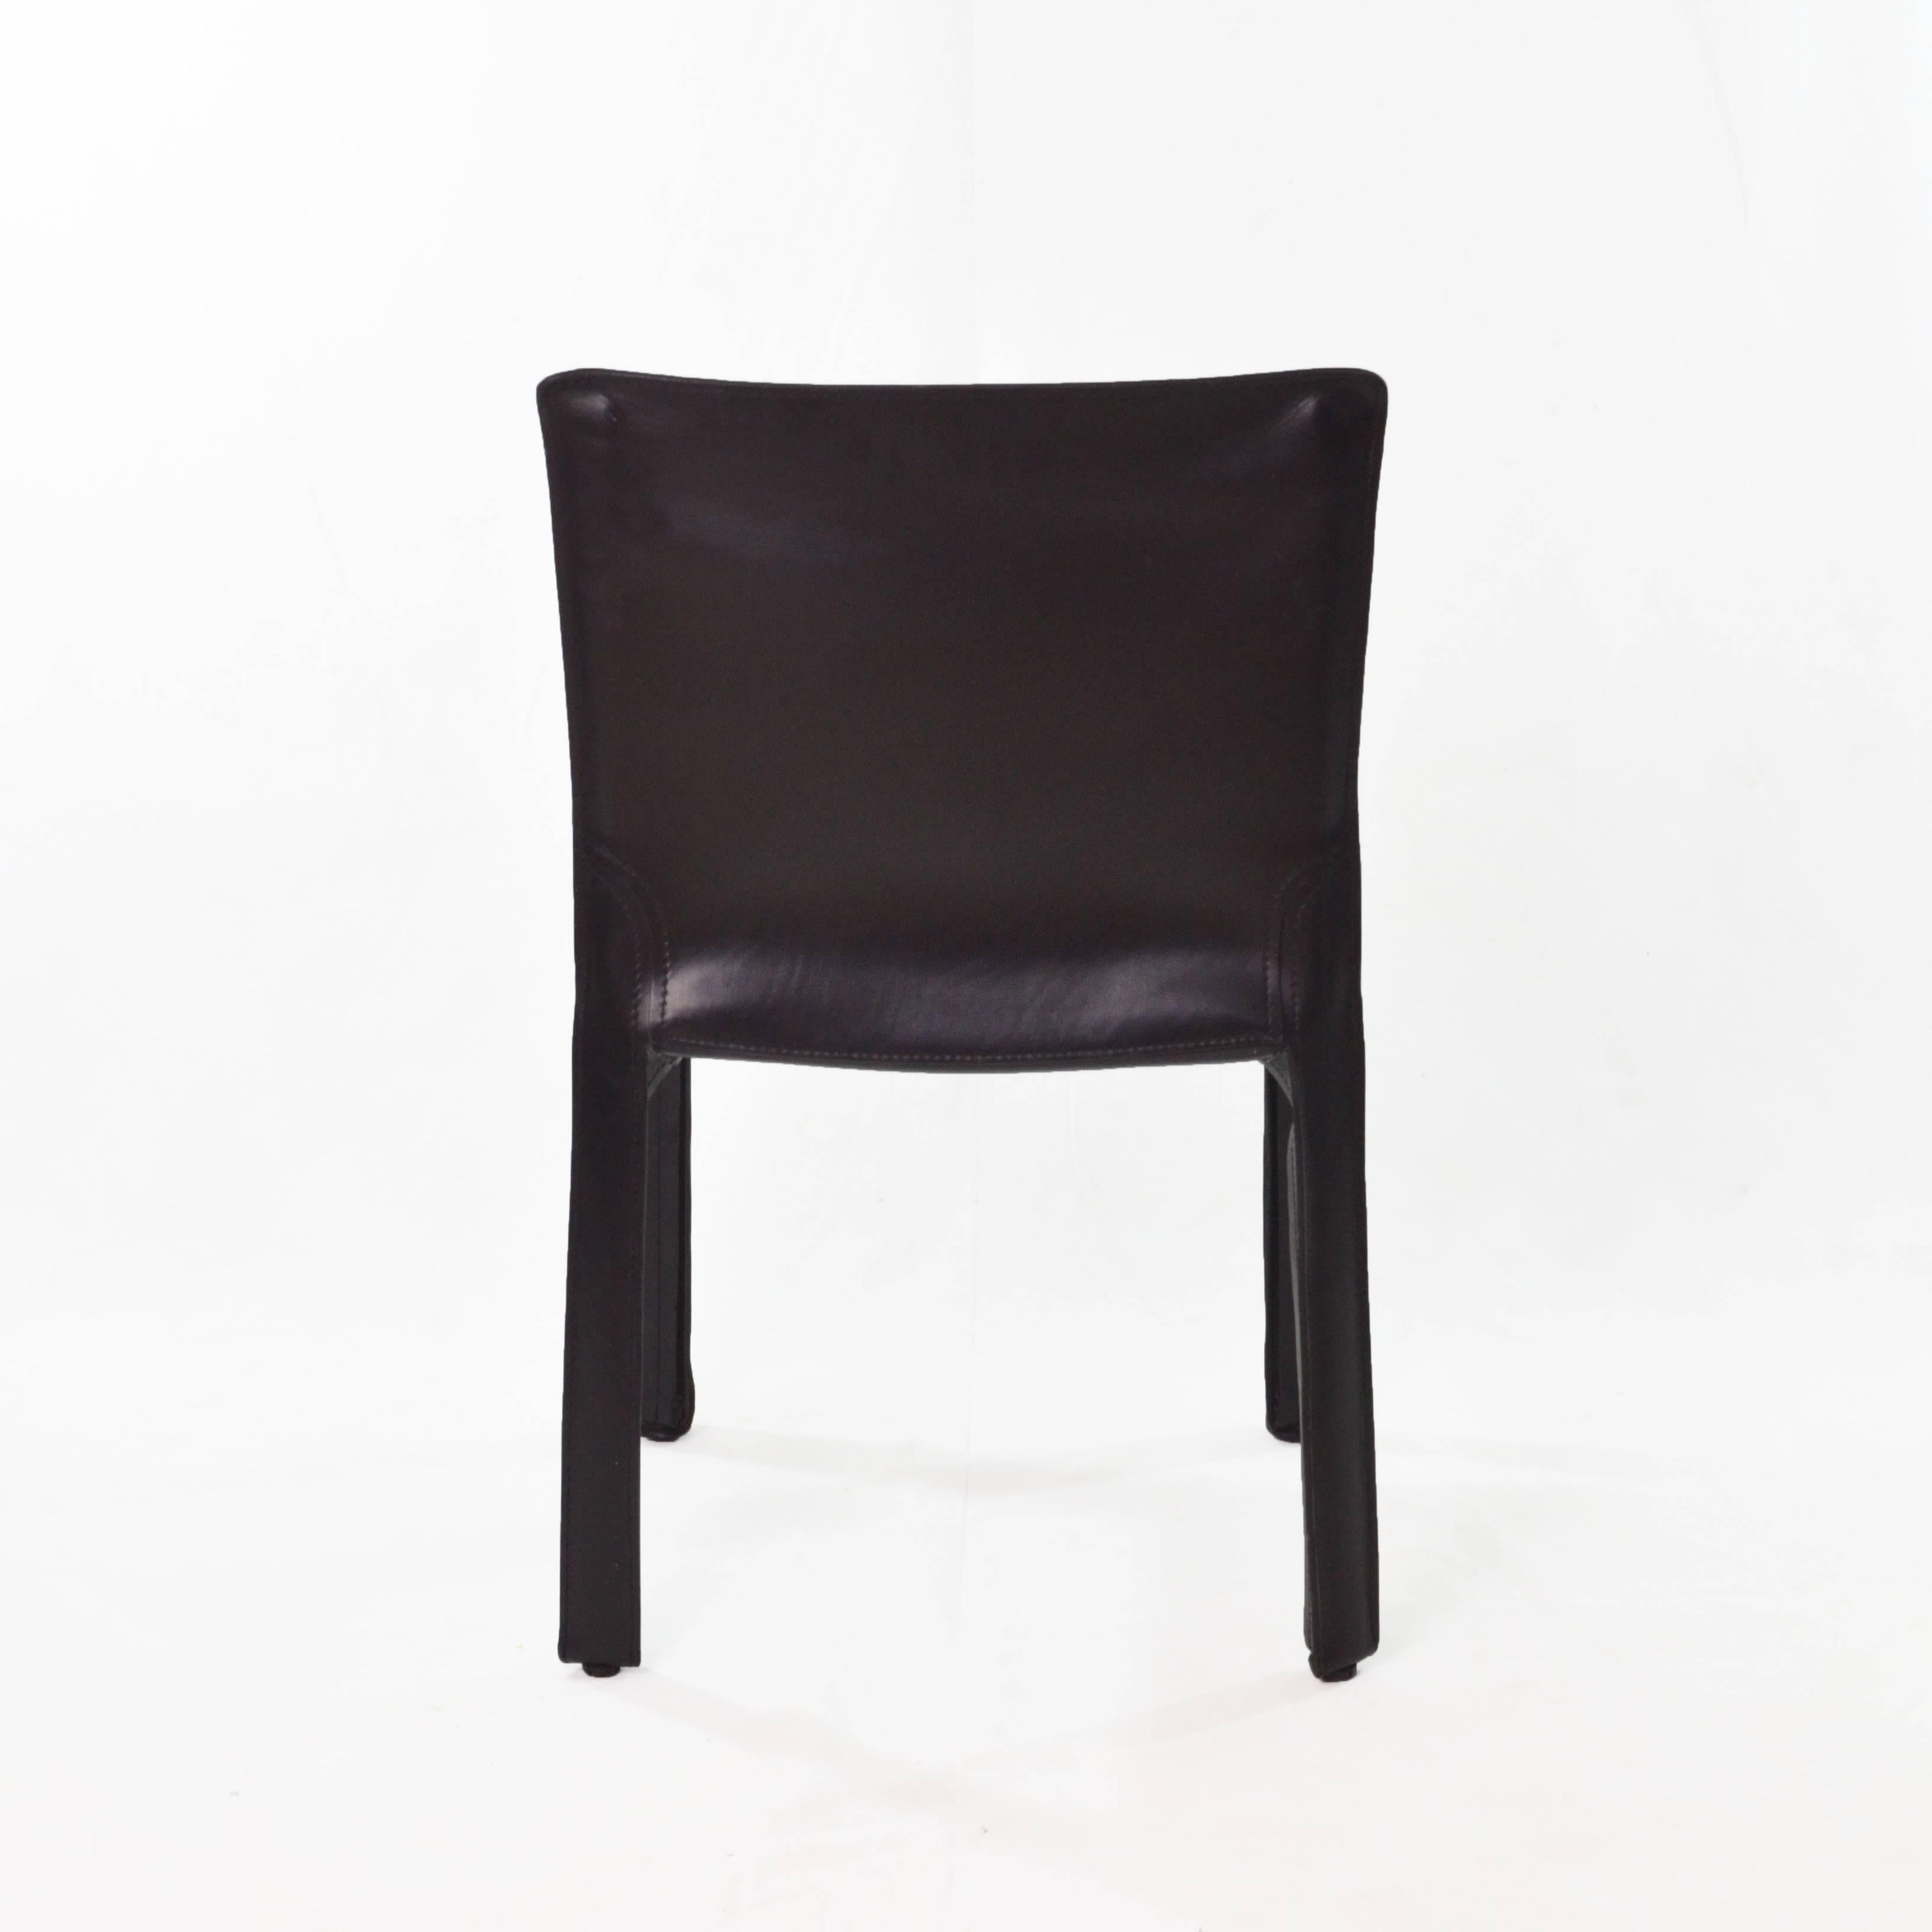 Post-Modern Black Leather Italian Cab 412 Chairs for Cassina by Mario Bellini Designer, 1980